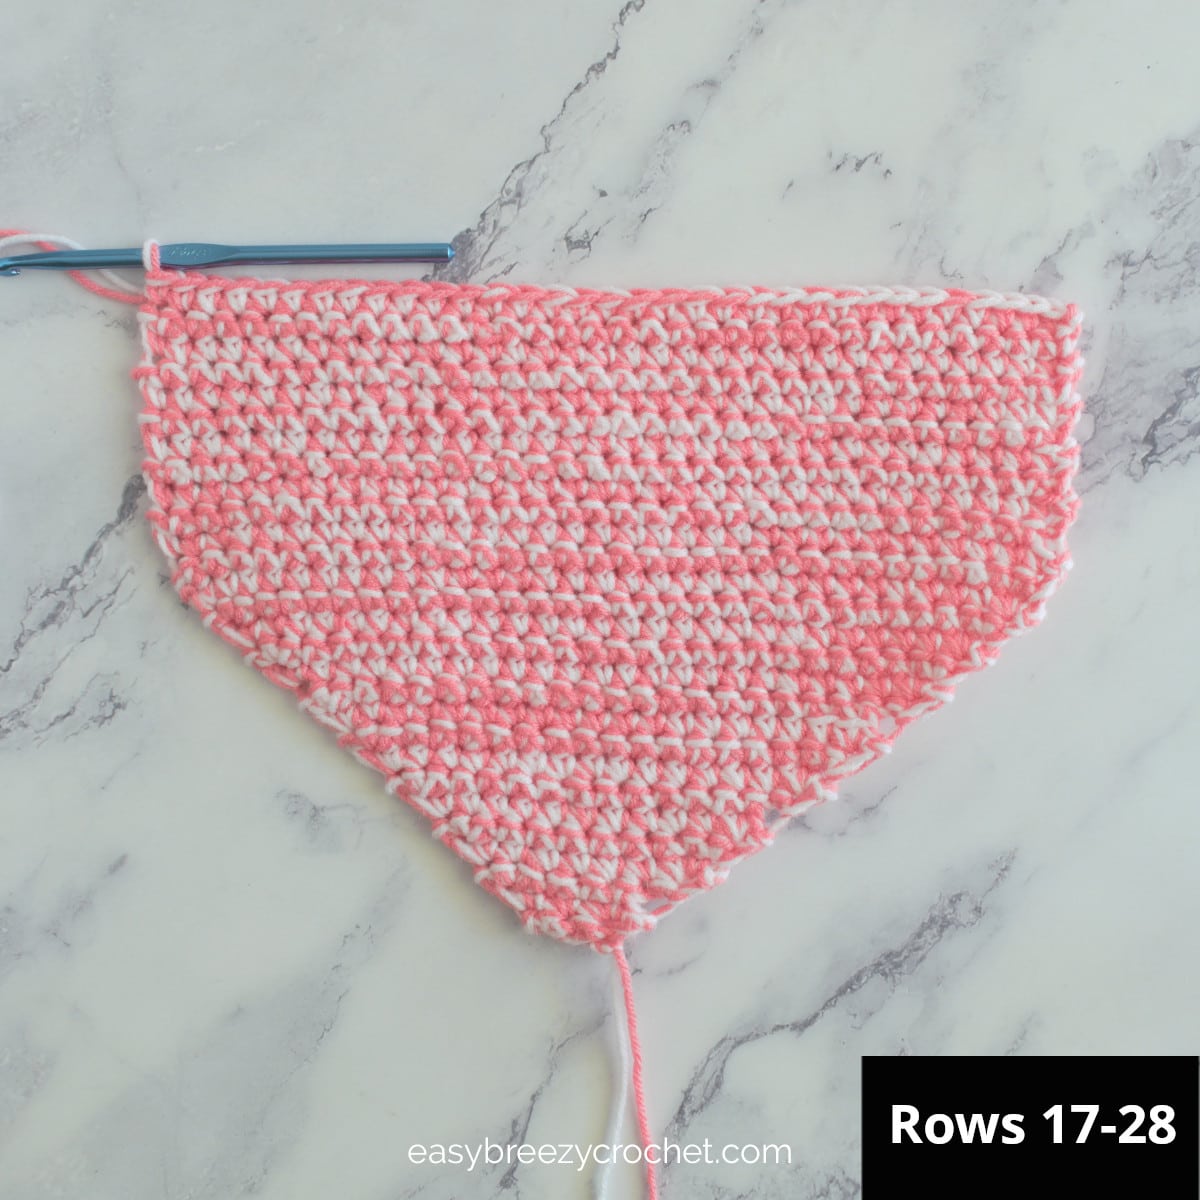 Image showing rows 1-28 of the crochet heart pillow.